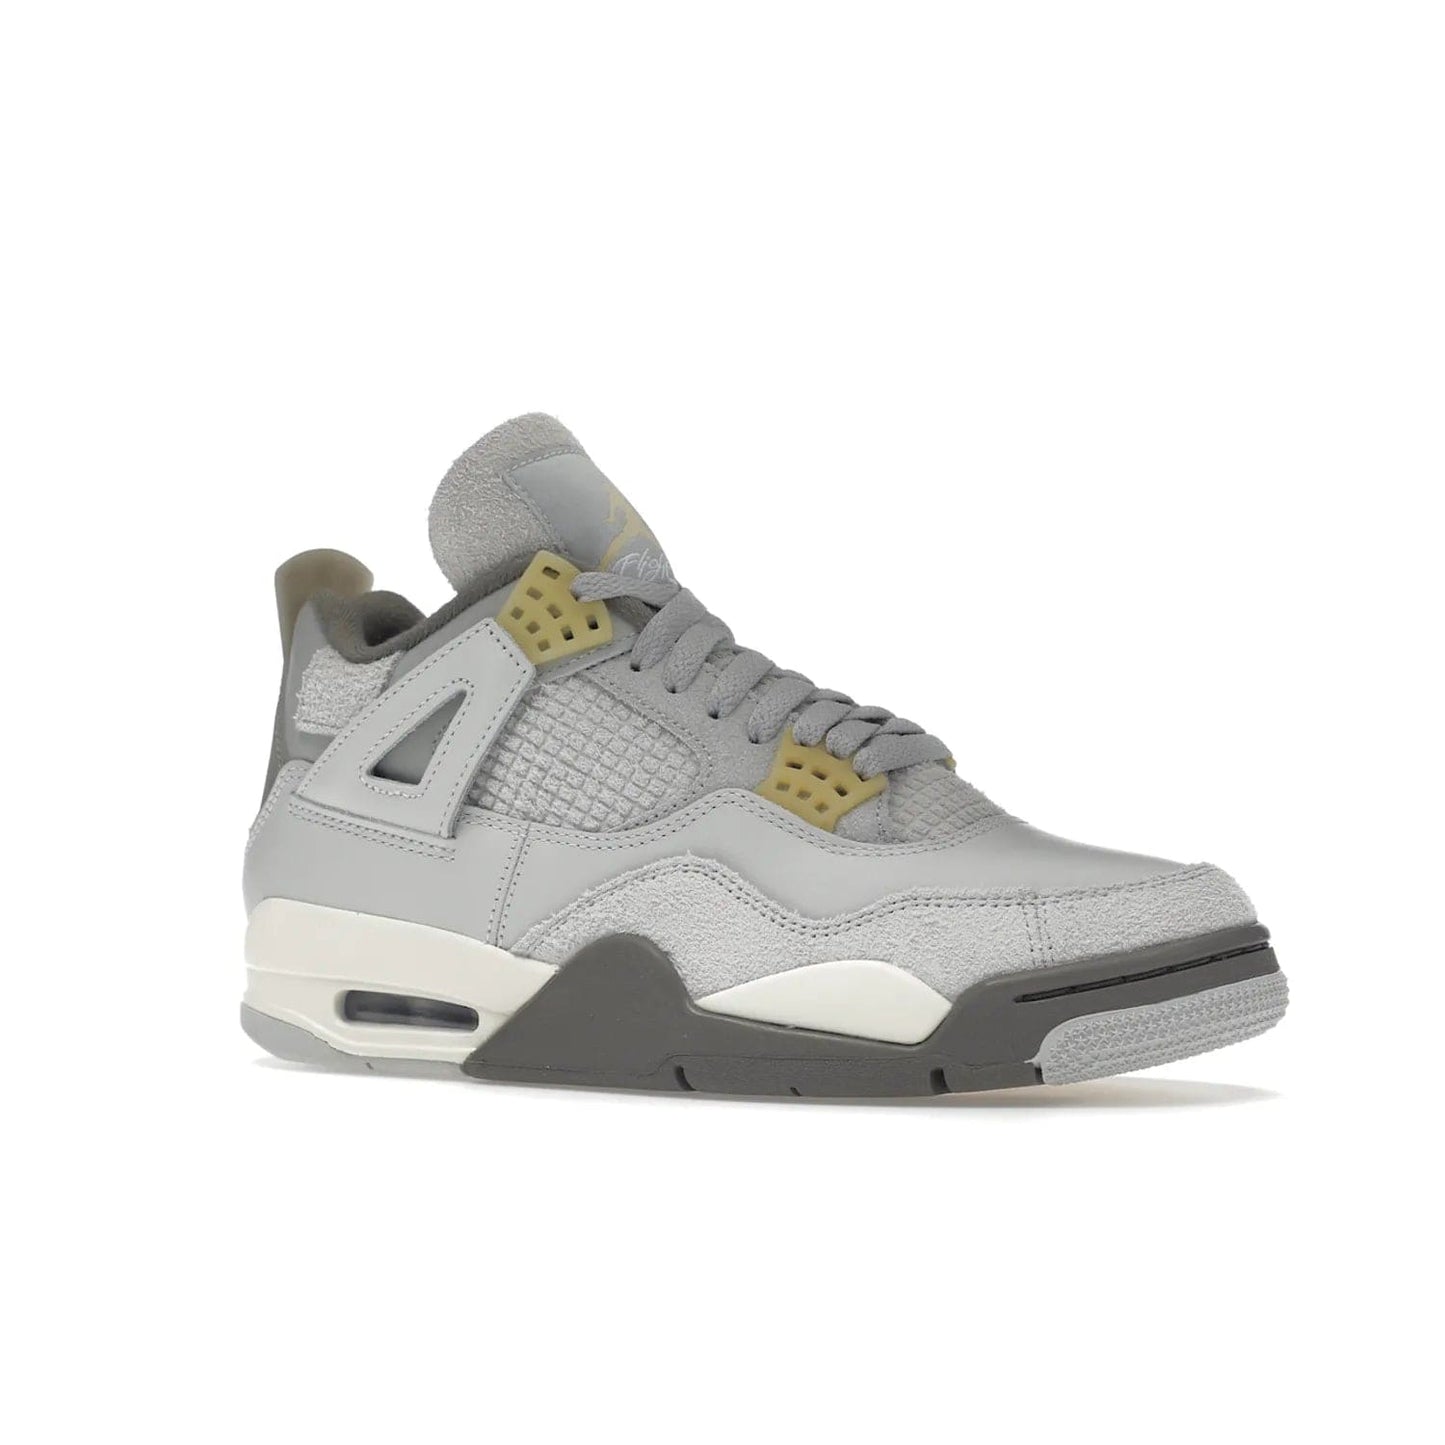 Jordan 4 Retro SE Craft Photon Dust - Image 4 - Only at www.BallersClubKickz.com - Upgrade your shoe collection with the Air Jordan 4 Retro SE Craft Photon Dust. This luxurious sneaker features a combination of suede and leather with unique grey tones like Photon Dust, Pale Vanilla, Off White, Grey Fog, Flat Pewter, and Sail. Available February 11, 2023.